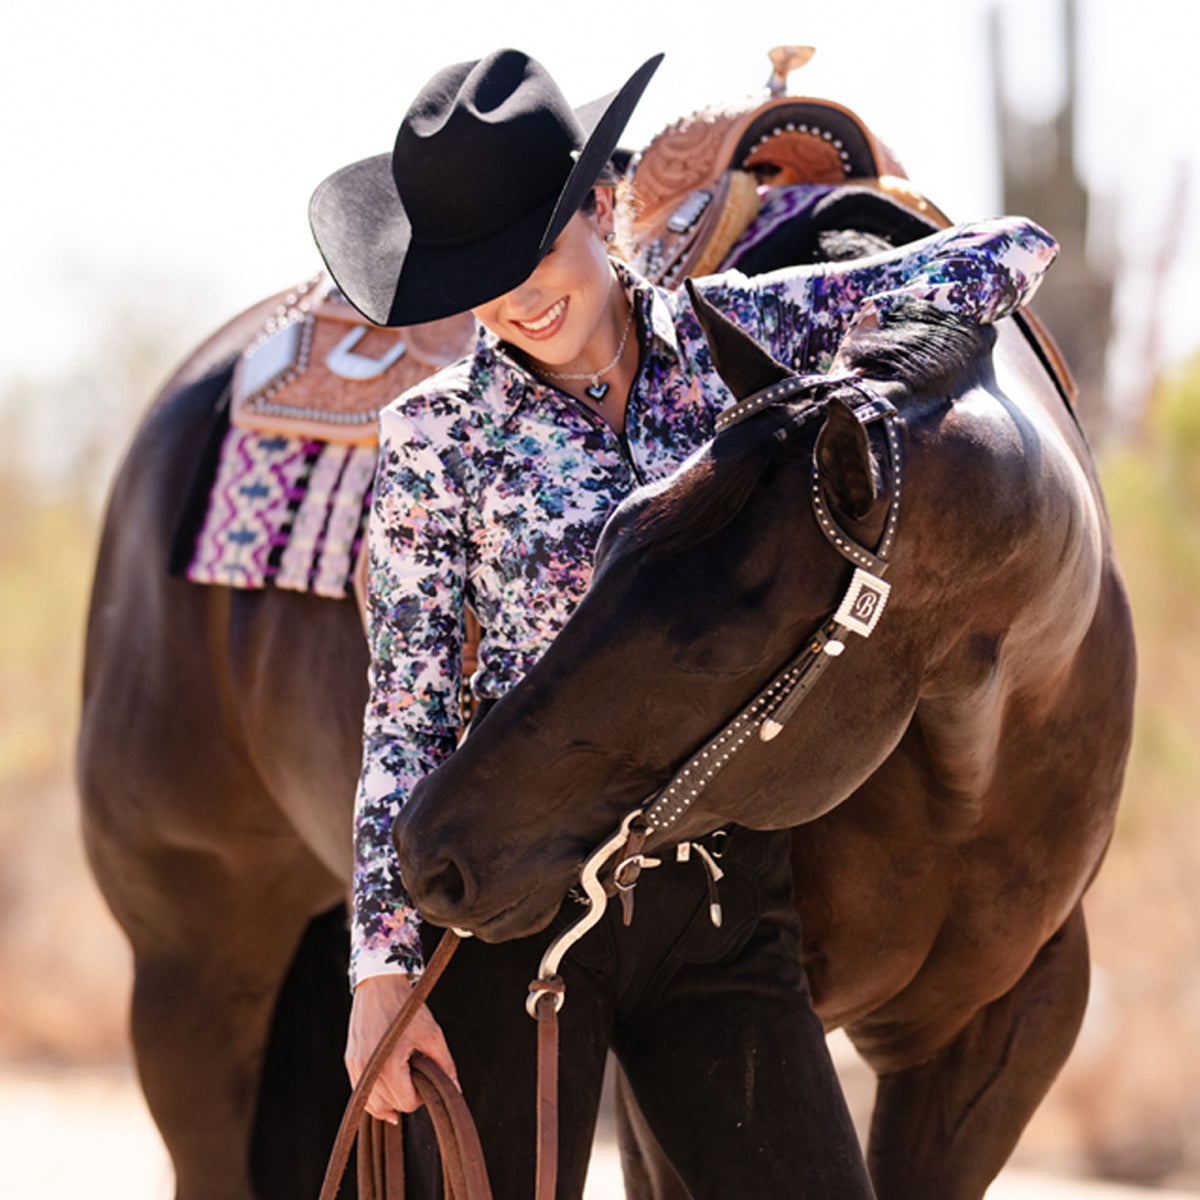 Hollywood meets rodeo with A&E's 'Rodeo Girls'